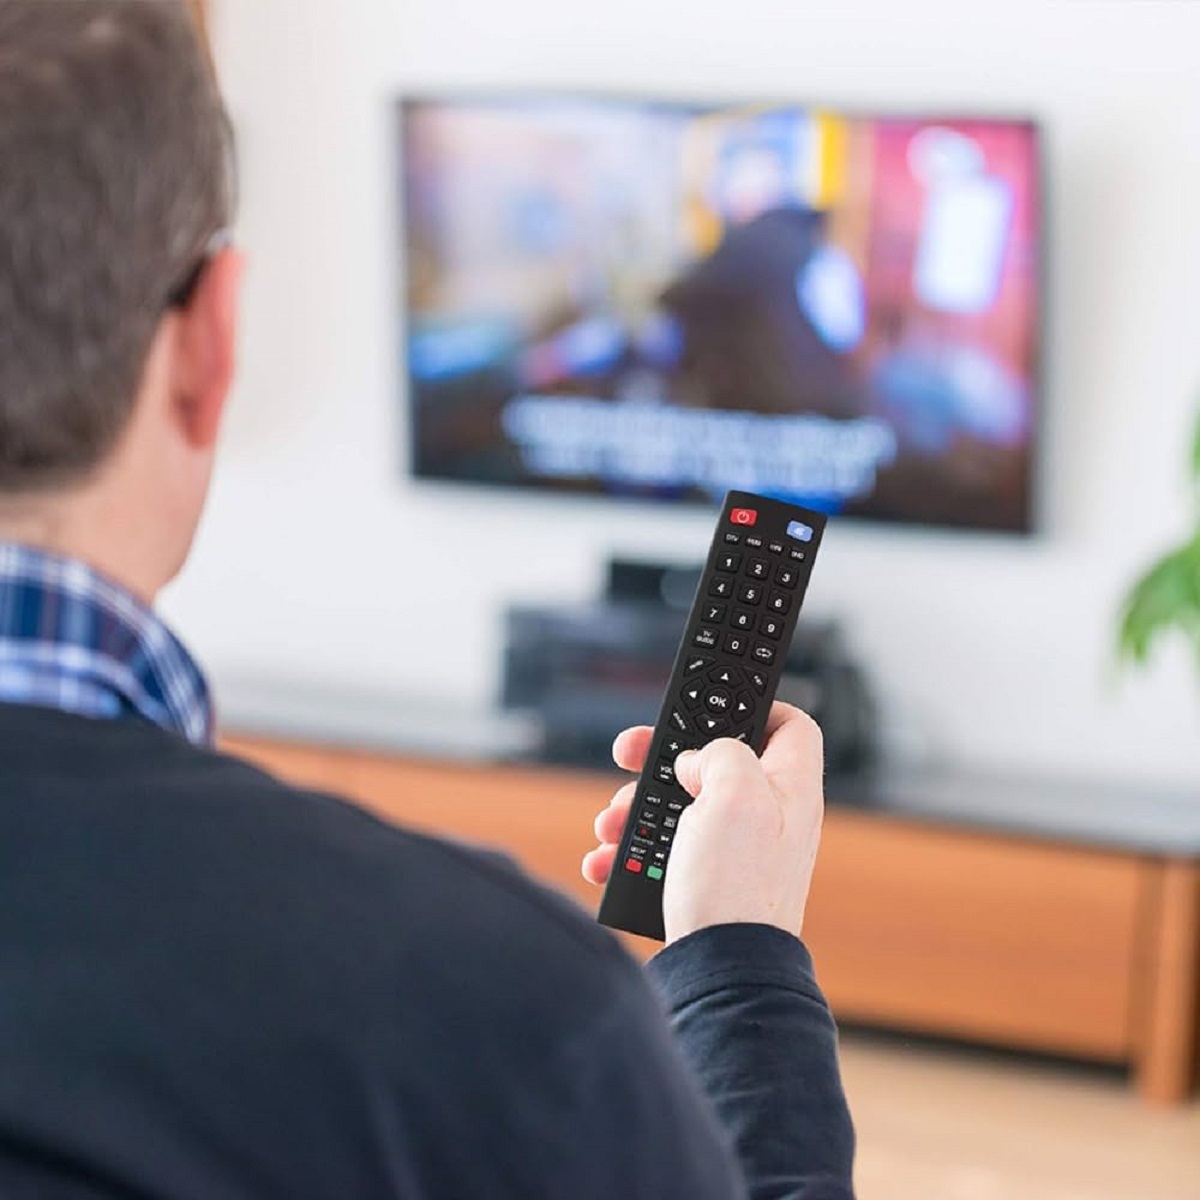 How To Connect A Universal Remote To A Westinghouse TV